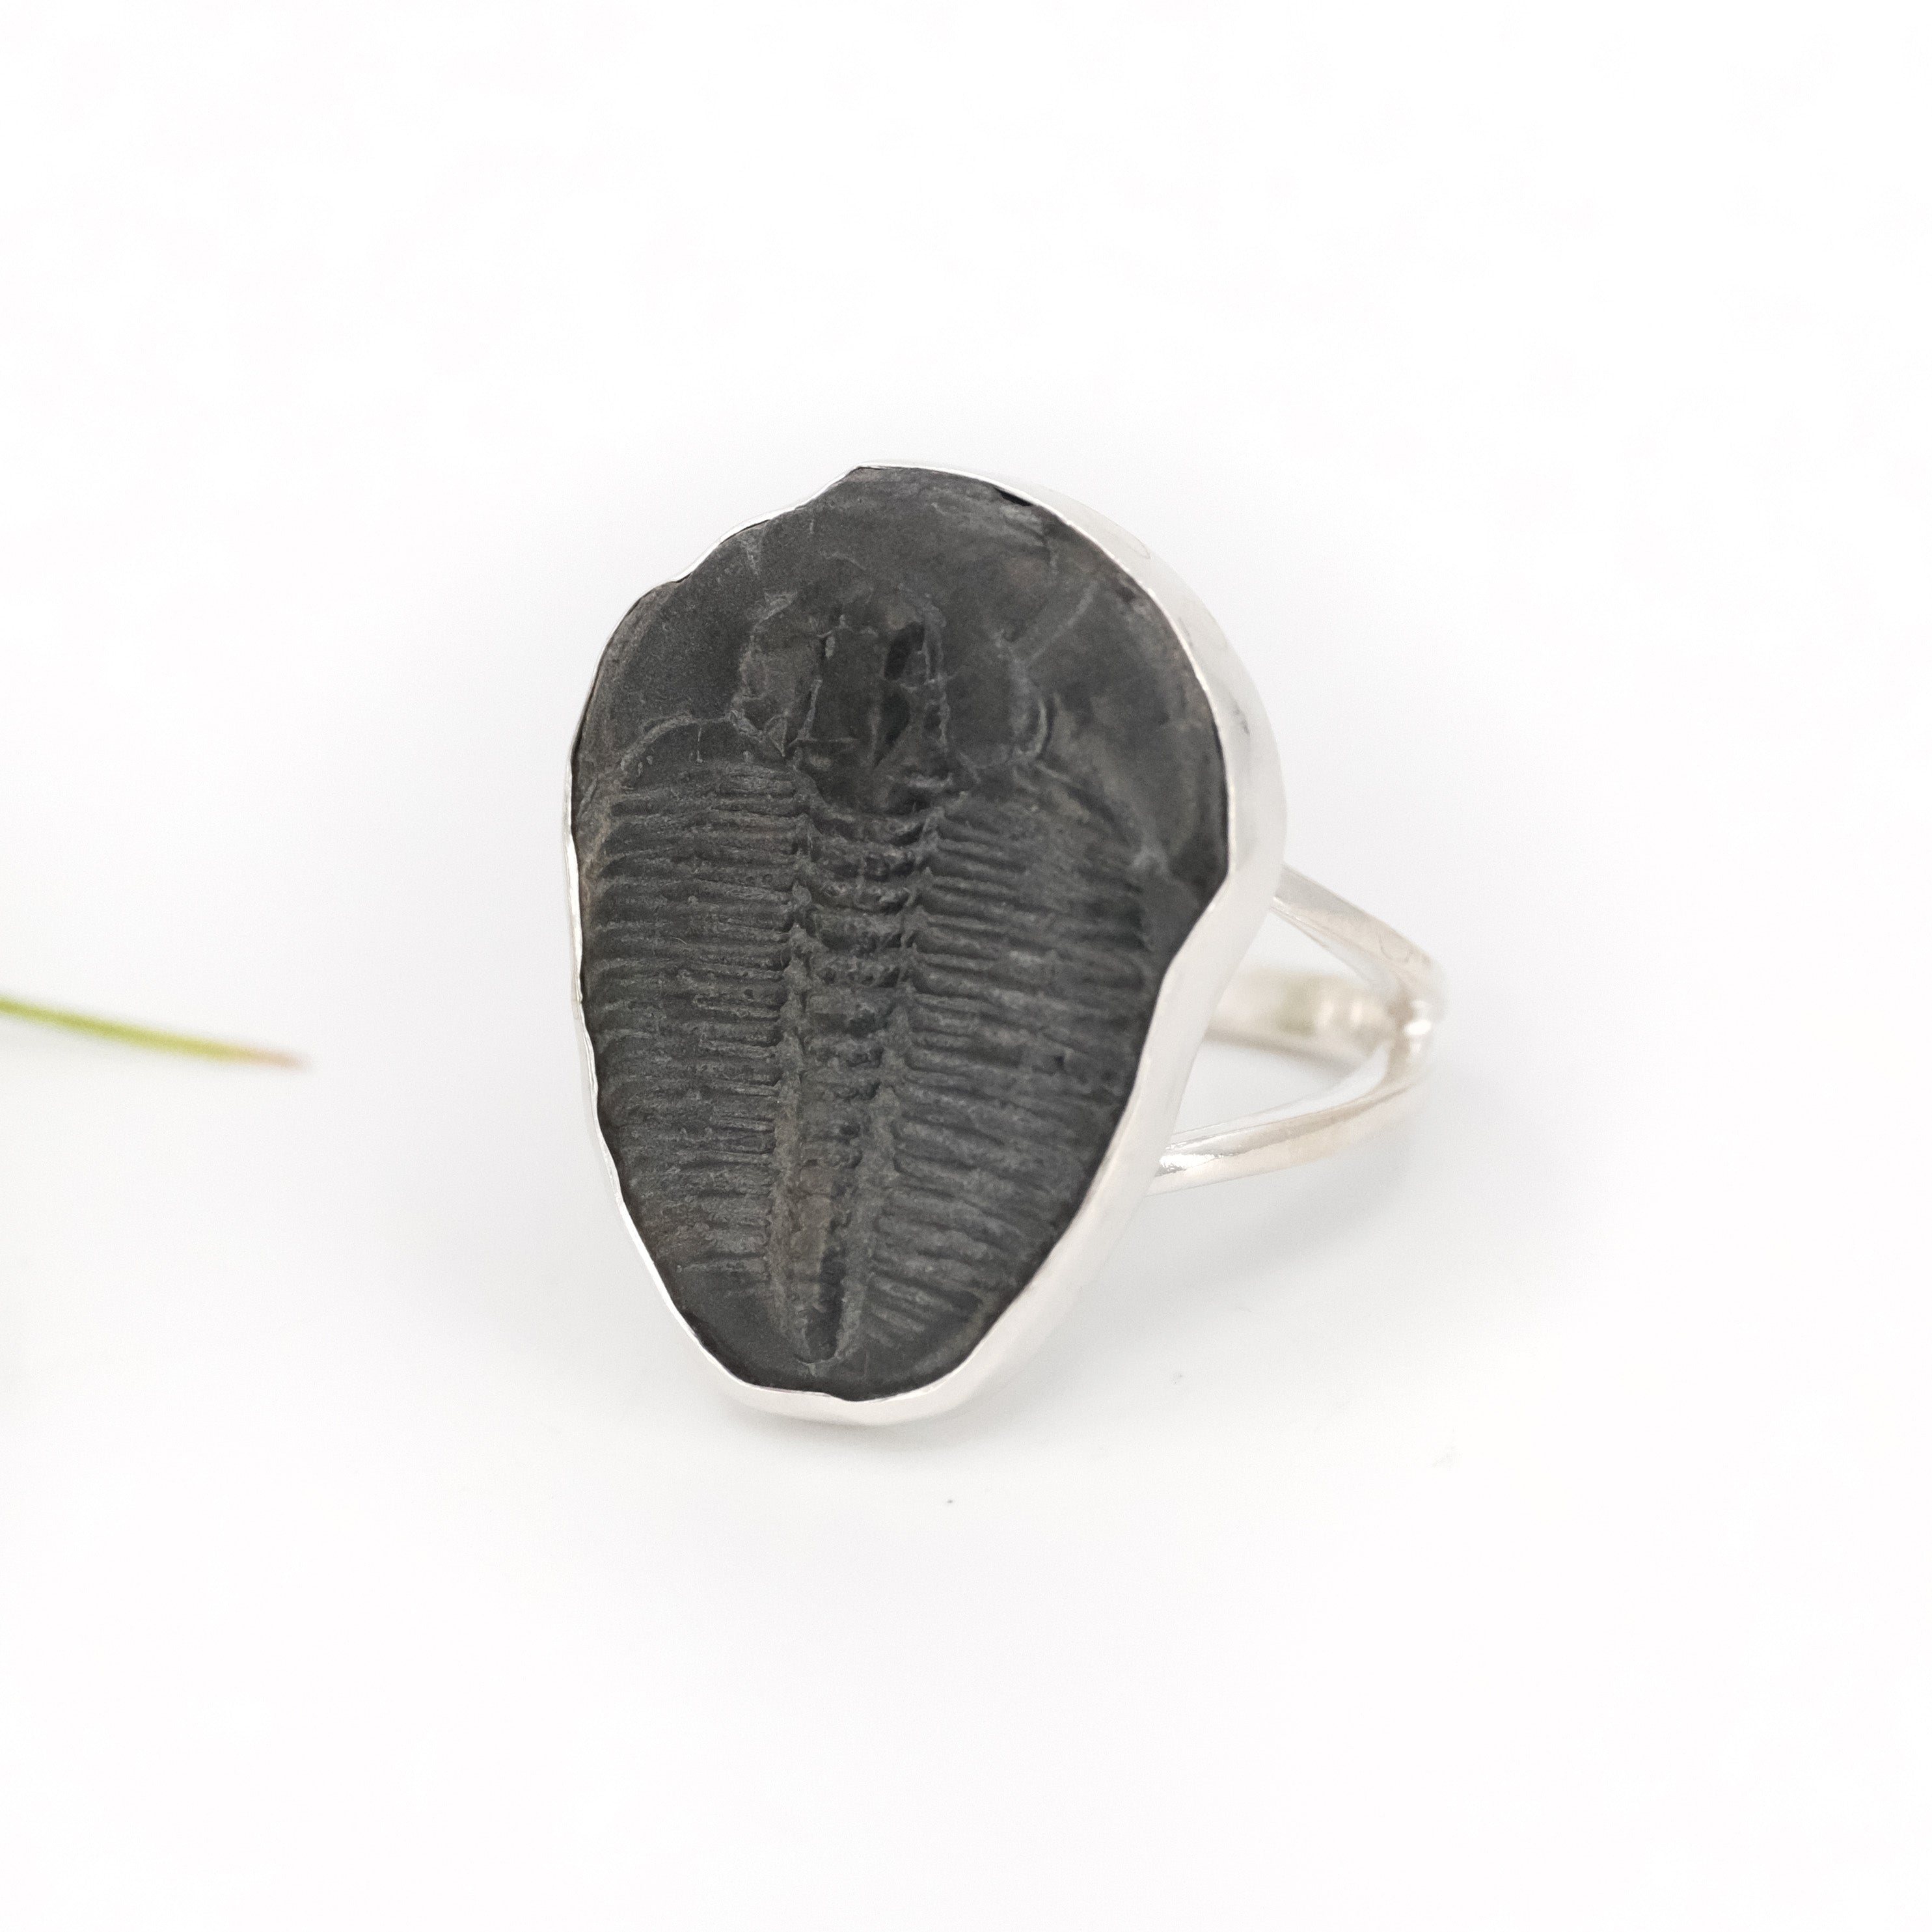 Trilobite Fossil Era Ring (Size 7.5) - One of a Kind